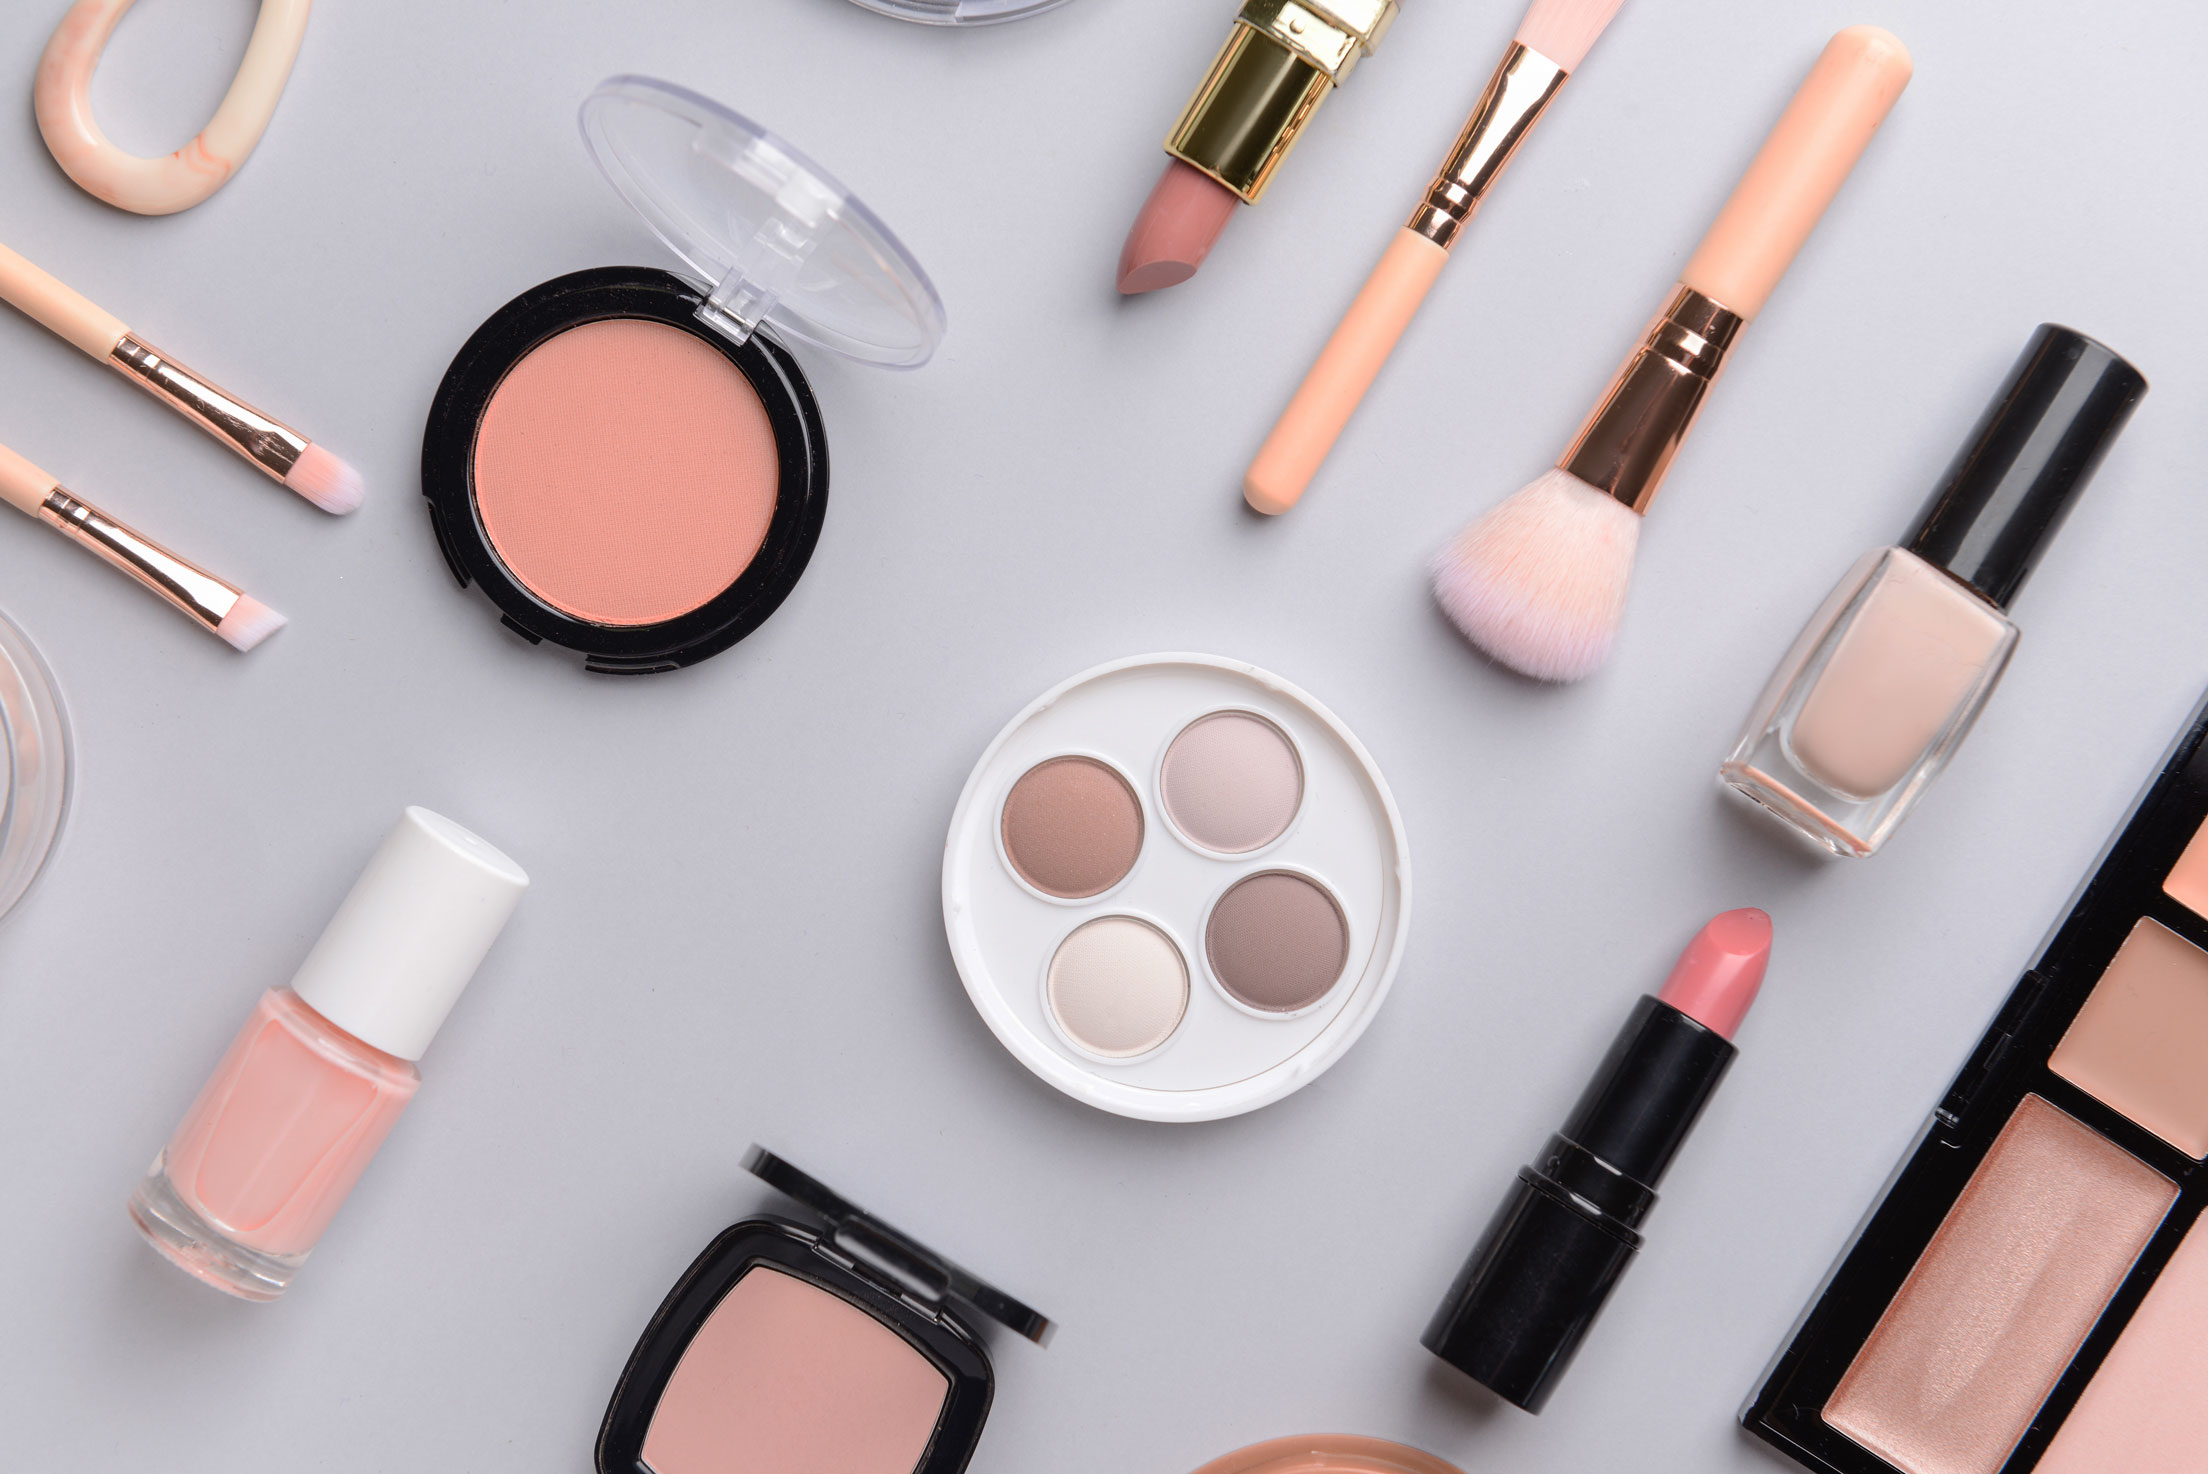 How to Choose the Right Makeup Products for You